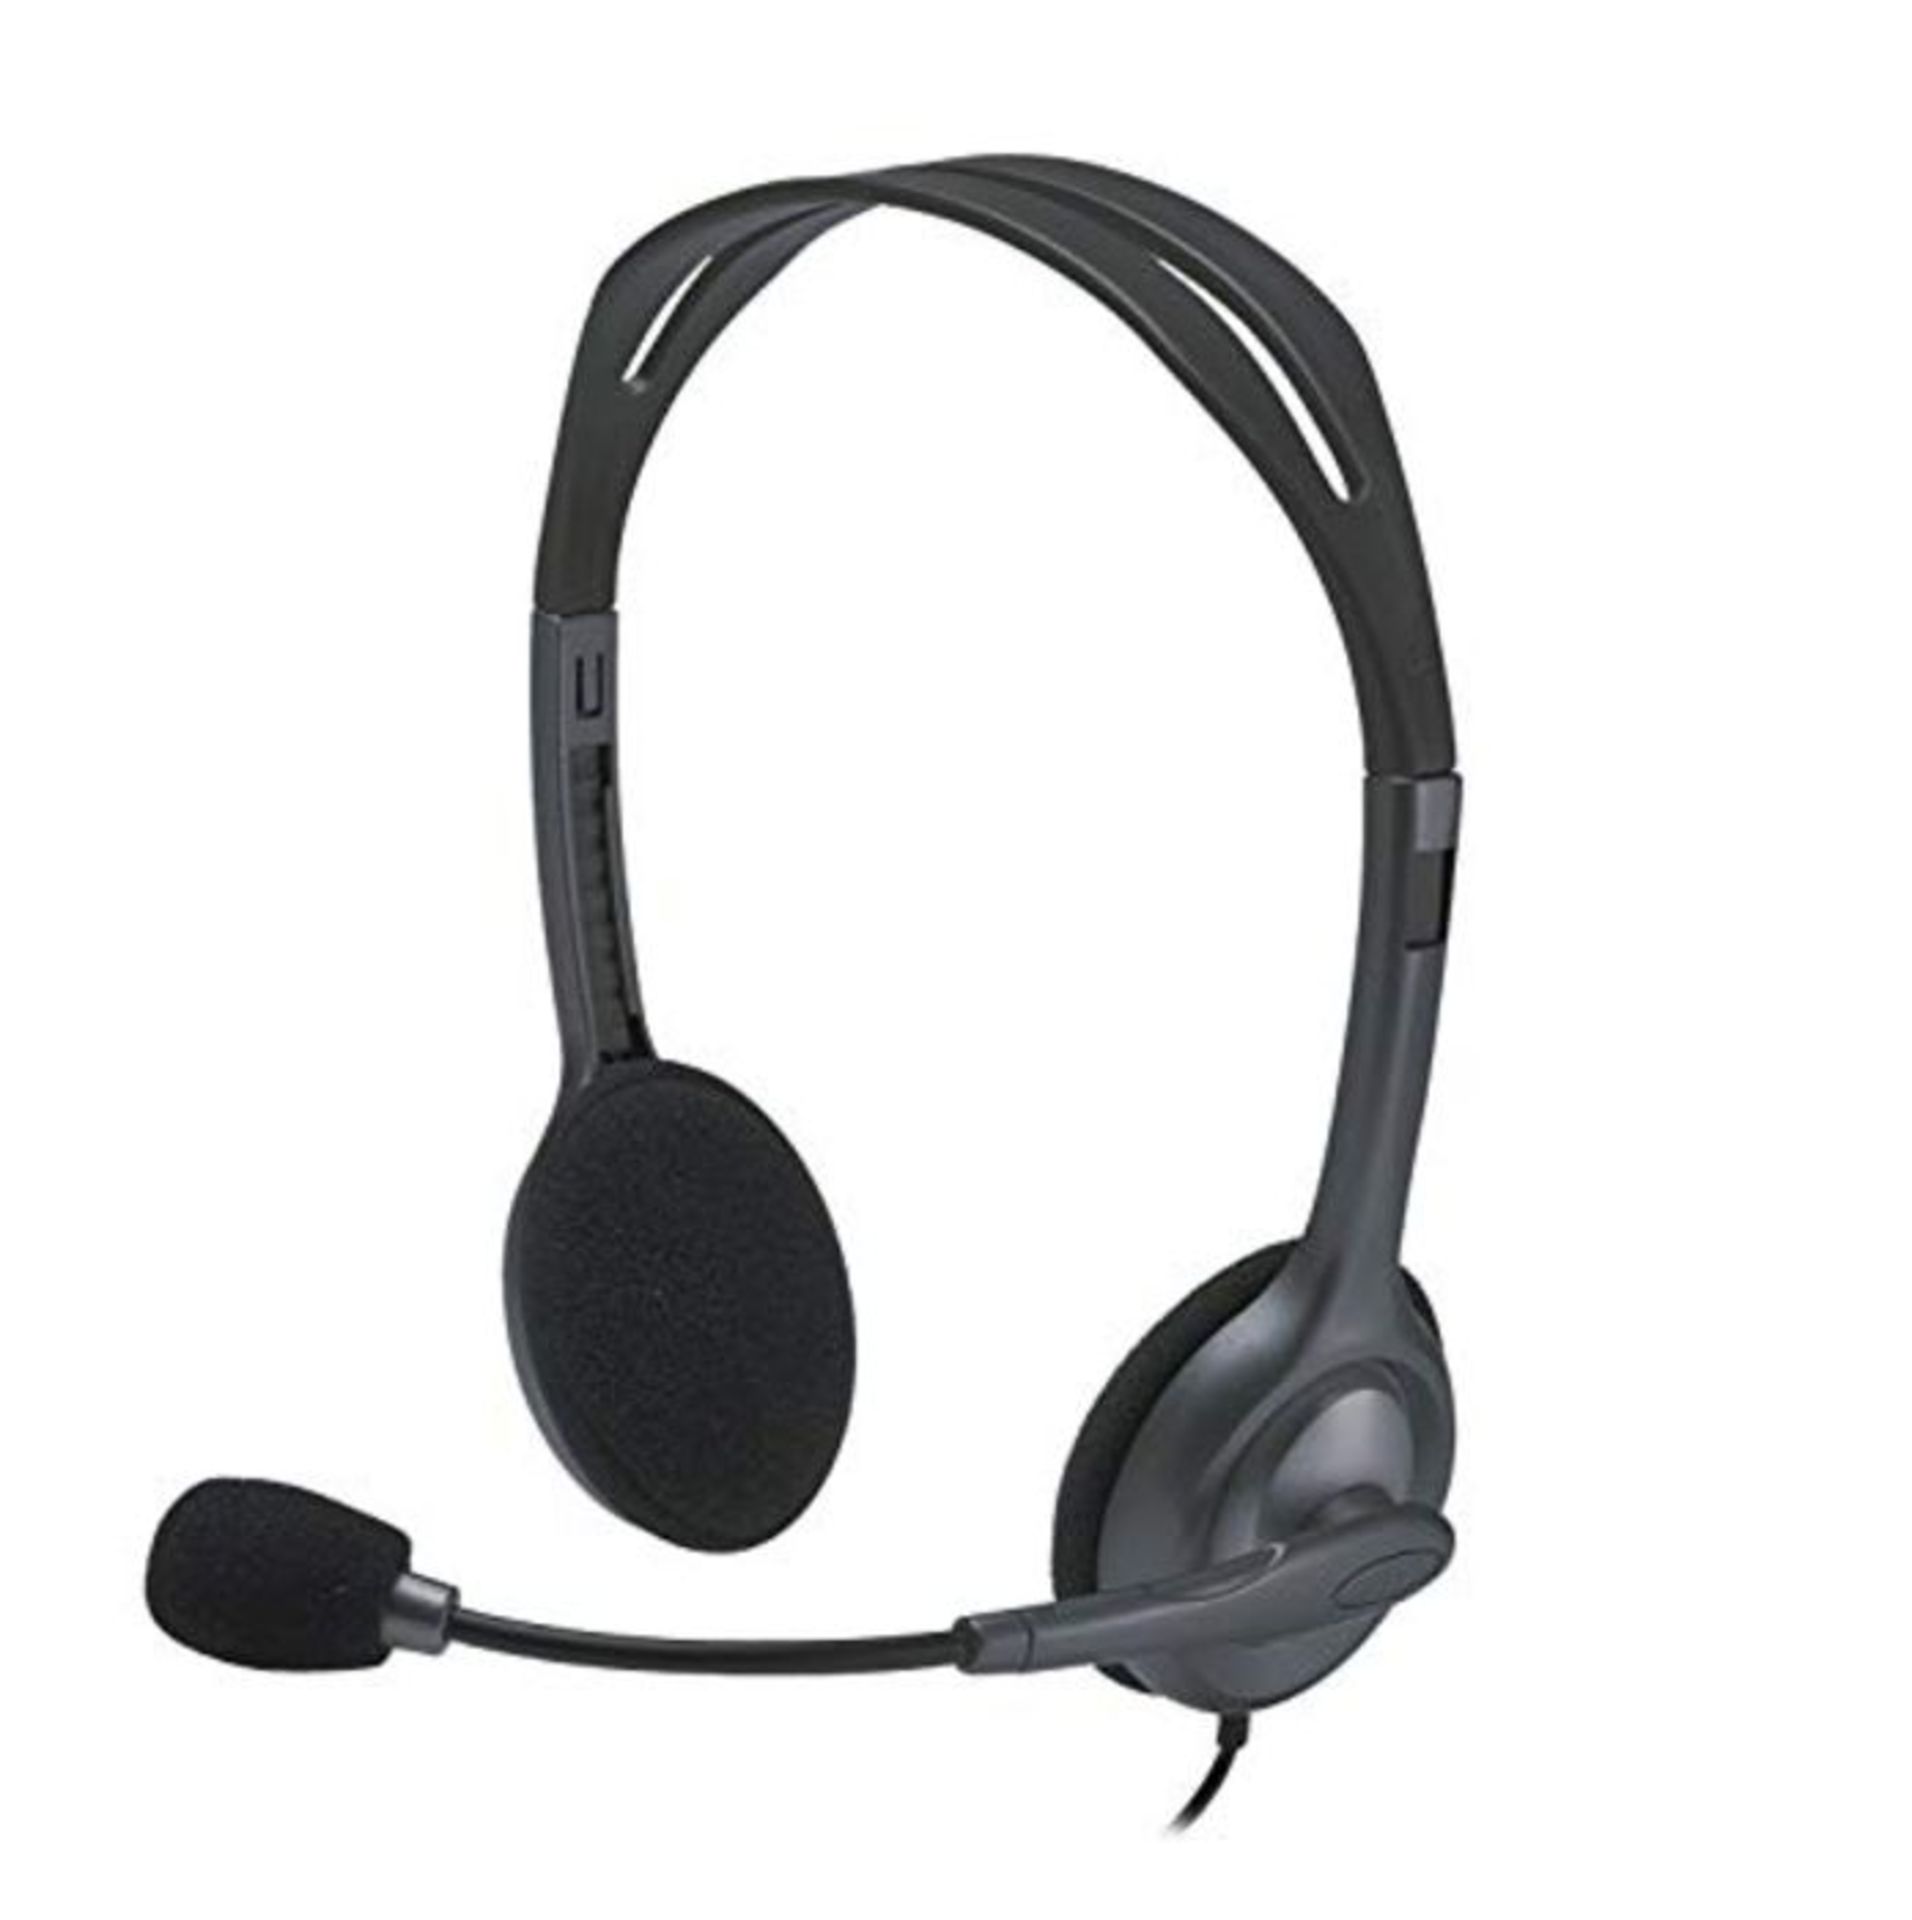 Logitech H111 Wired Headset, Stereo Headphones with Noise-Cancelling Microphone, 3.5 m